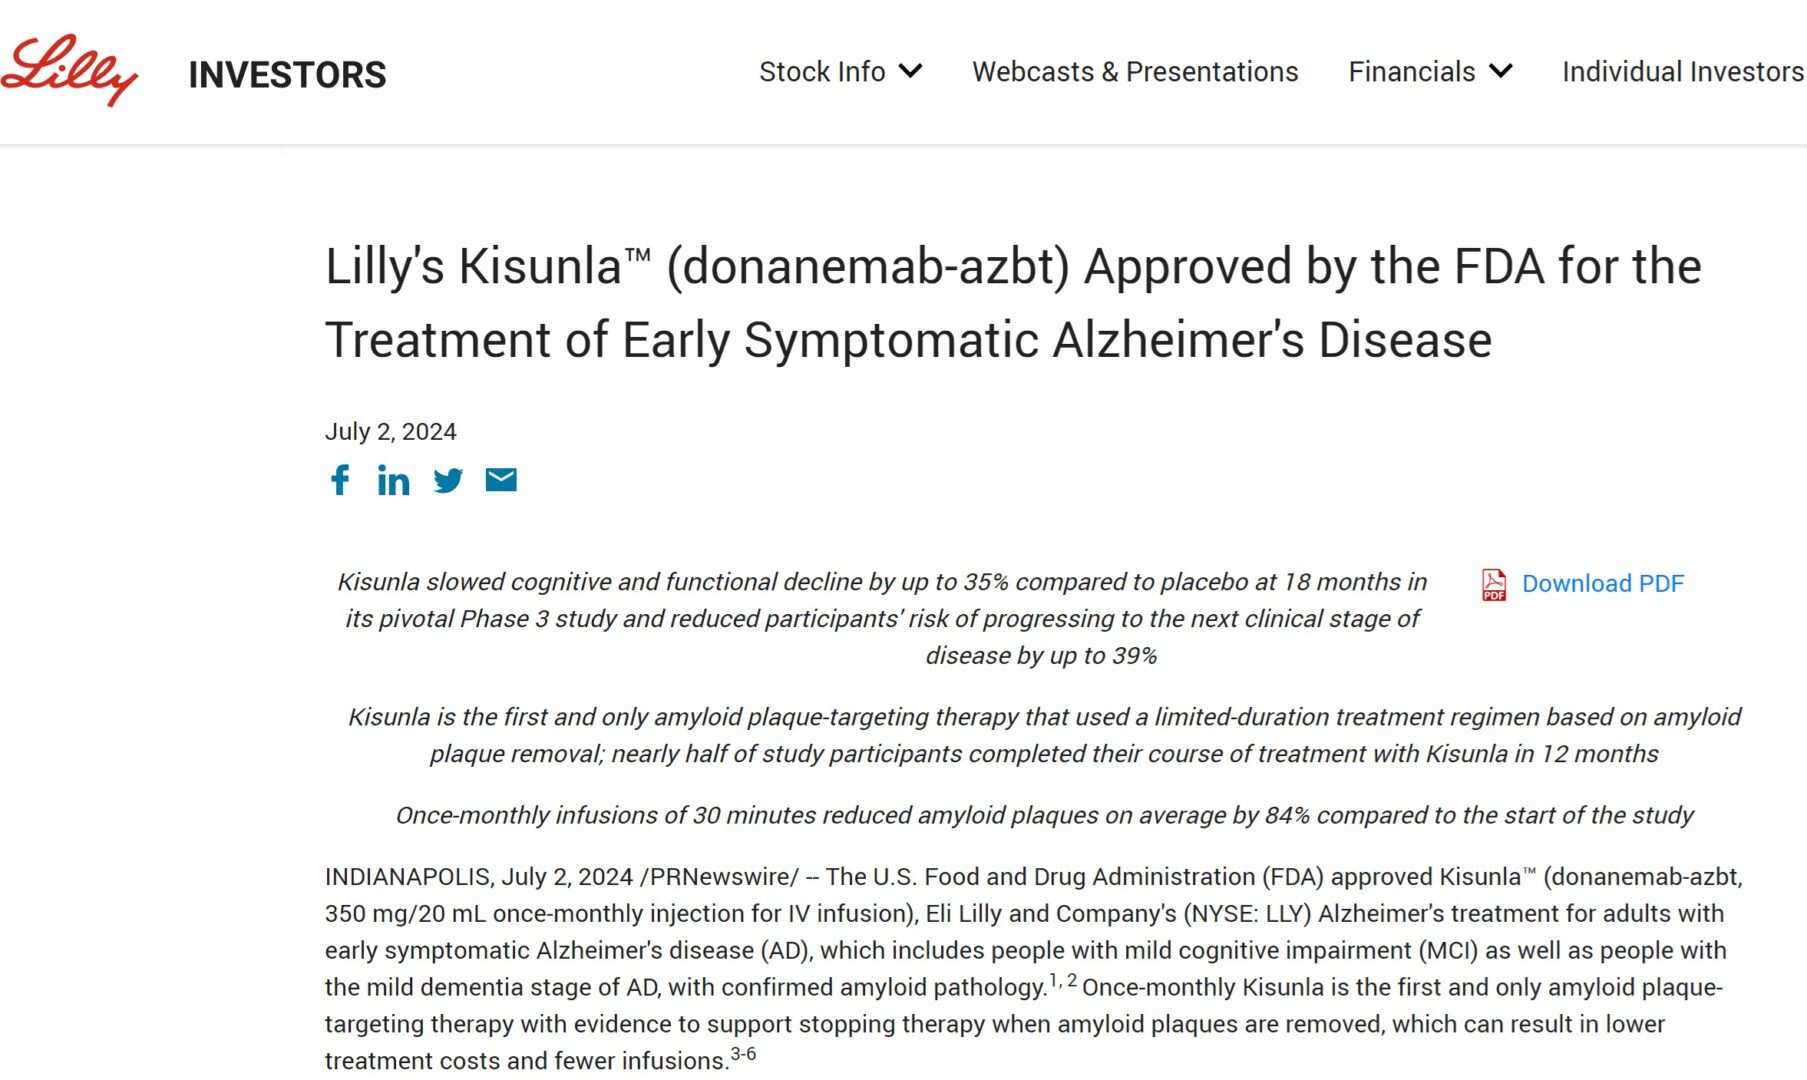 Lilly's Kisunla™ (donanemab-azbt) Approved by the FDA for the Treatment of Early Symptomatic Alzheimer's Disease